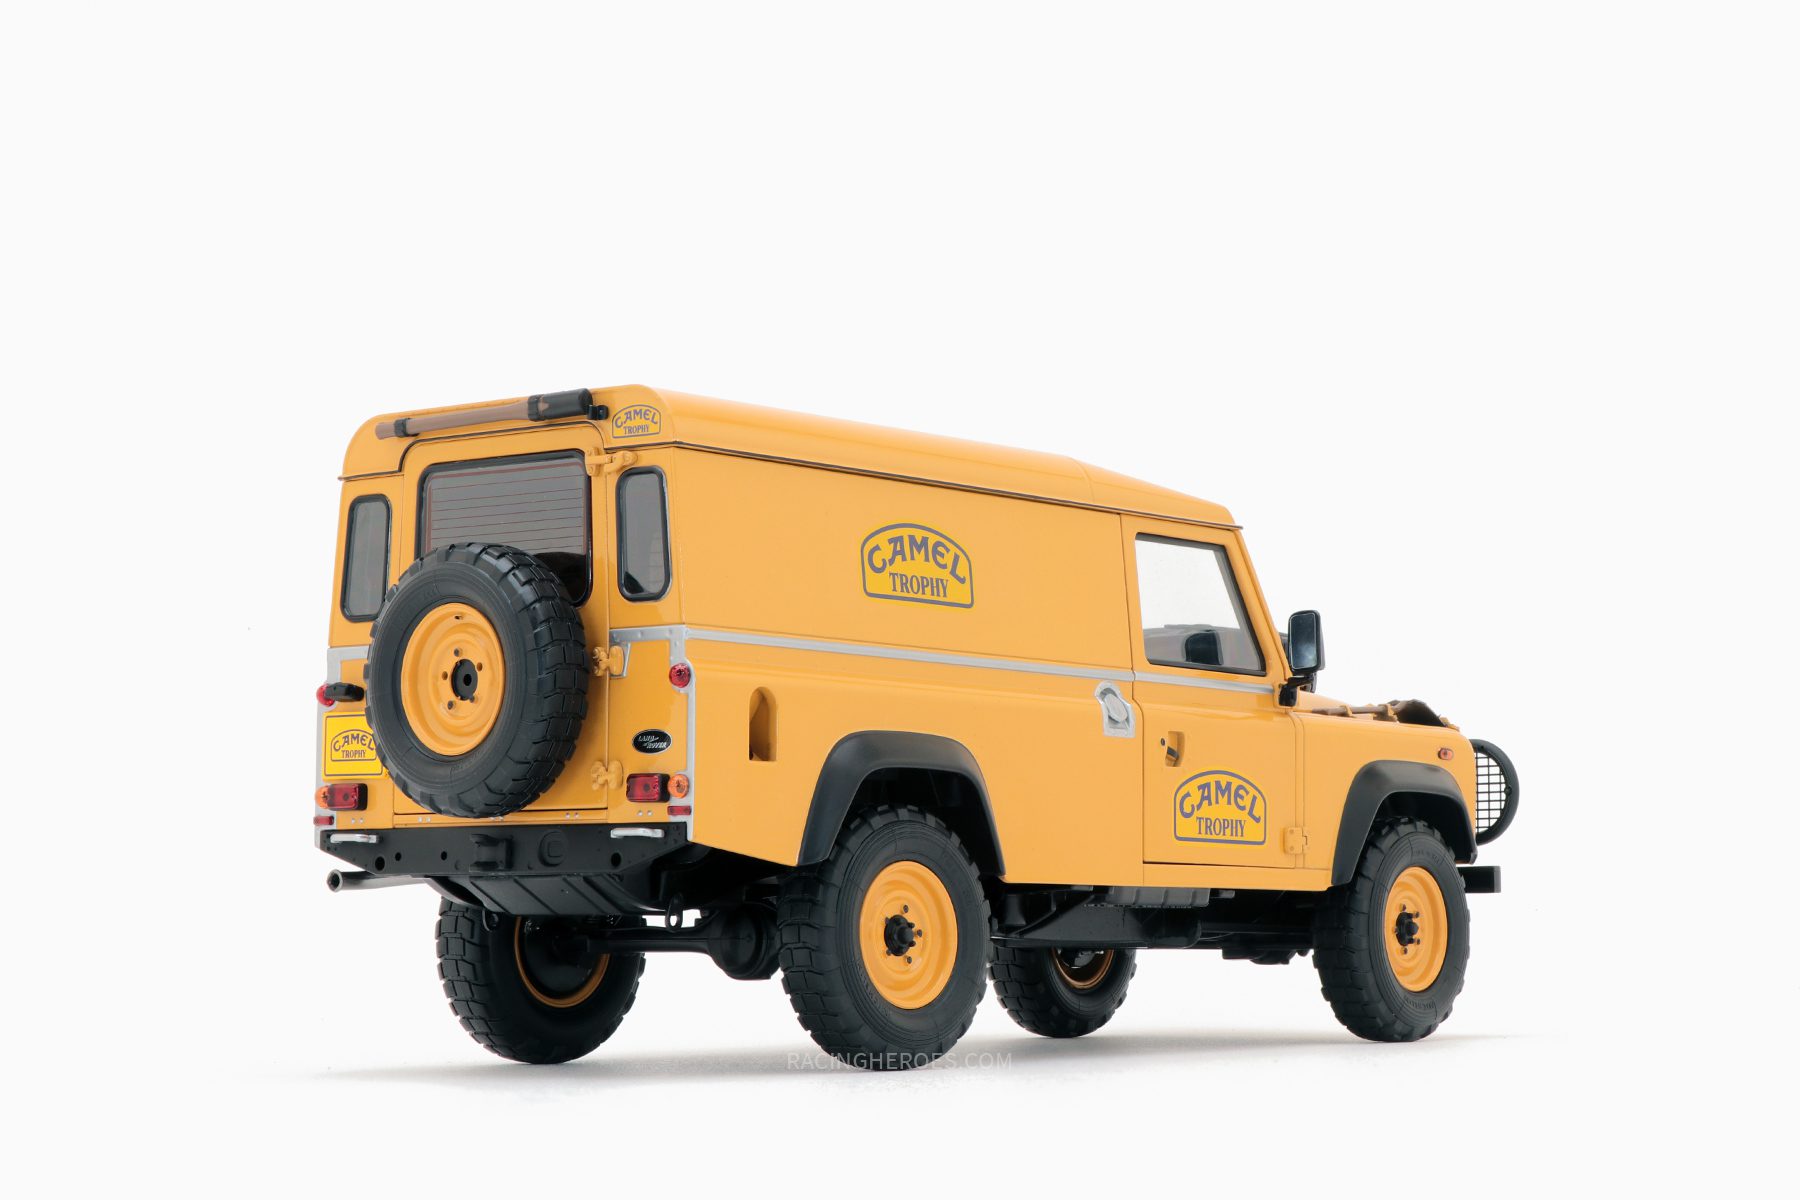 Land Rover Defender 110 “Camel Trophy” Support Unit Borneo 1:18 by Almost Real